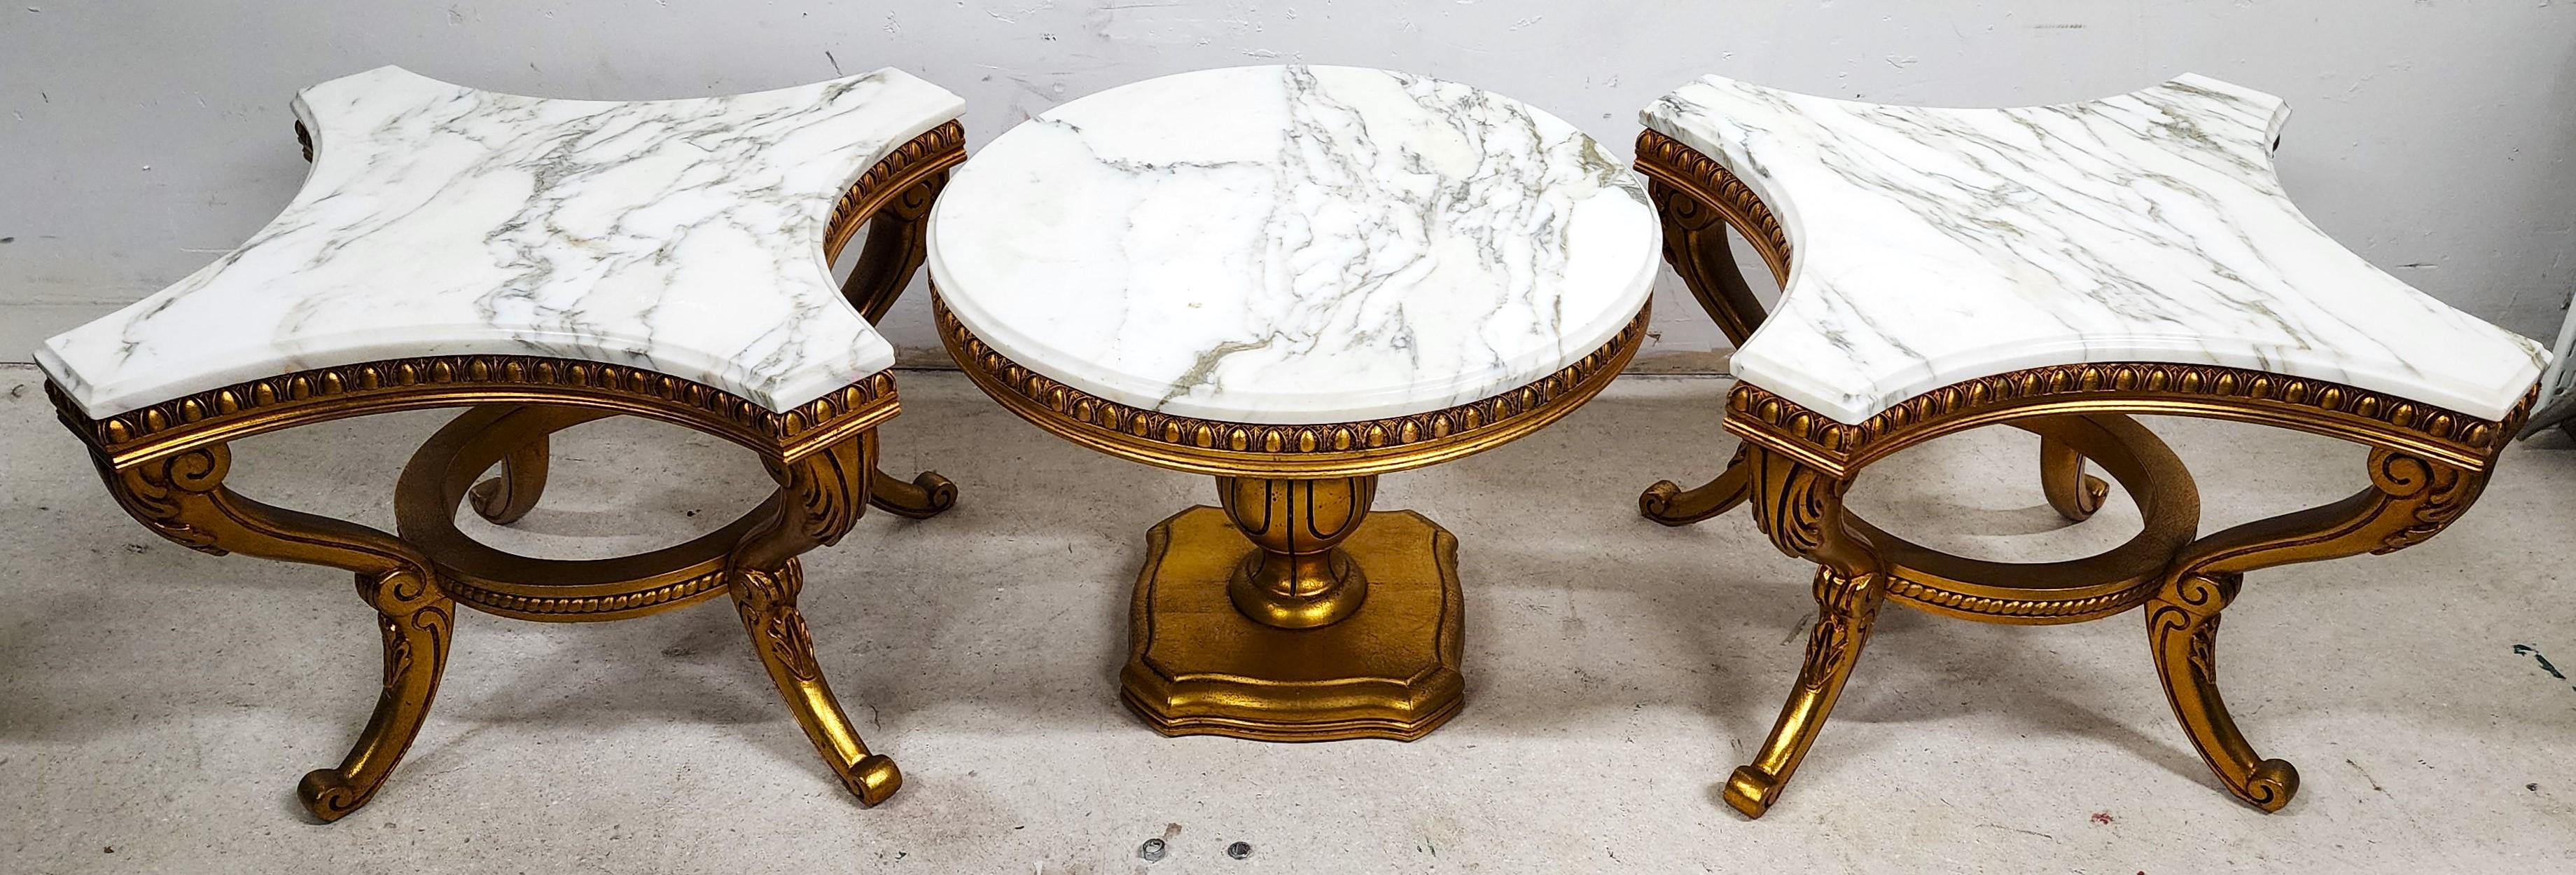 For FULL item description click on CONTINUE READING at the bottom of this page.

Offering One Of Our Recent Palm Beach Estate Fine Furniture Acquisitions Of A
3 Piece Louis VX Coffee and/or Side Tables with Beveled Edge Carrara Marble tops and Gilt